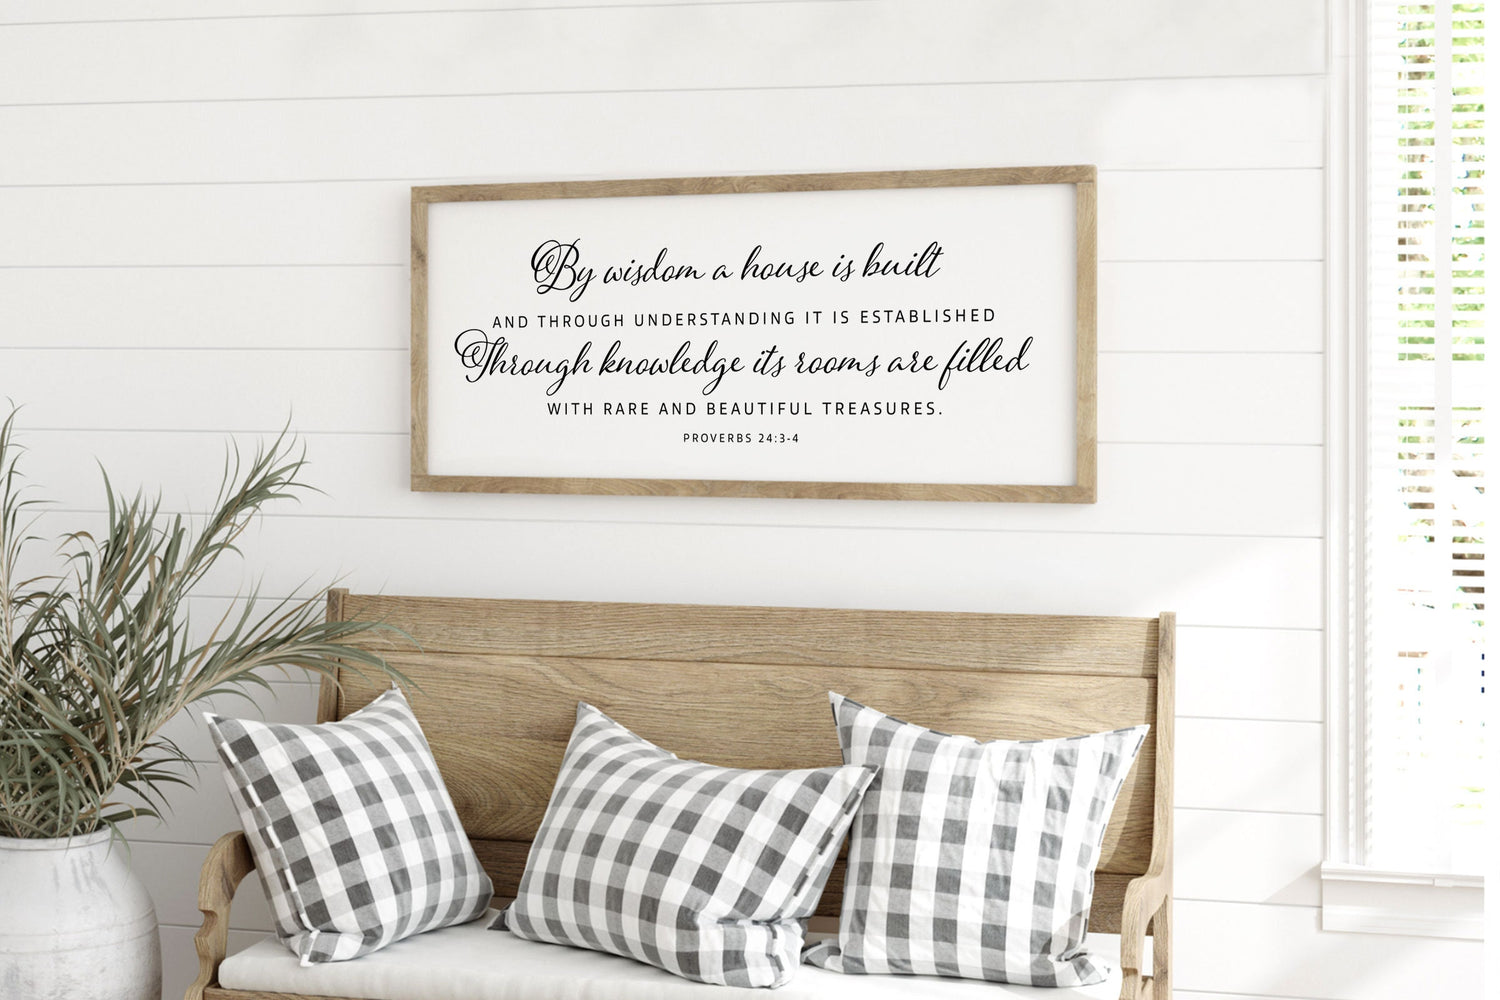 By Wisdom A House is Built Wood Sign Farmhouse | Scripture Sign | framed wood sign | Living Room Sign | Christian Wall Art | Proverbs 24:3-4